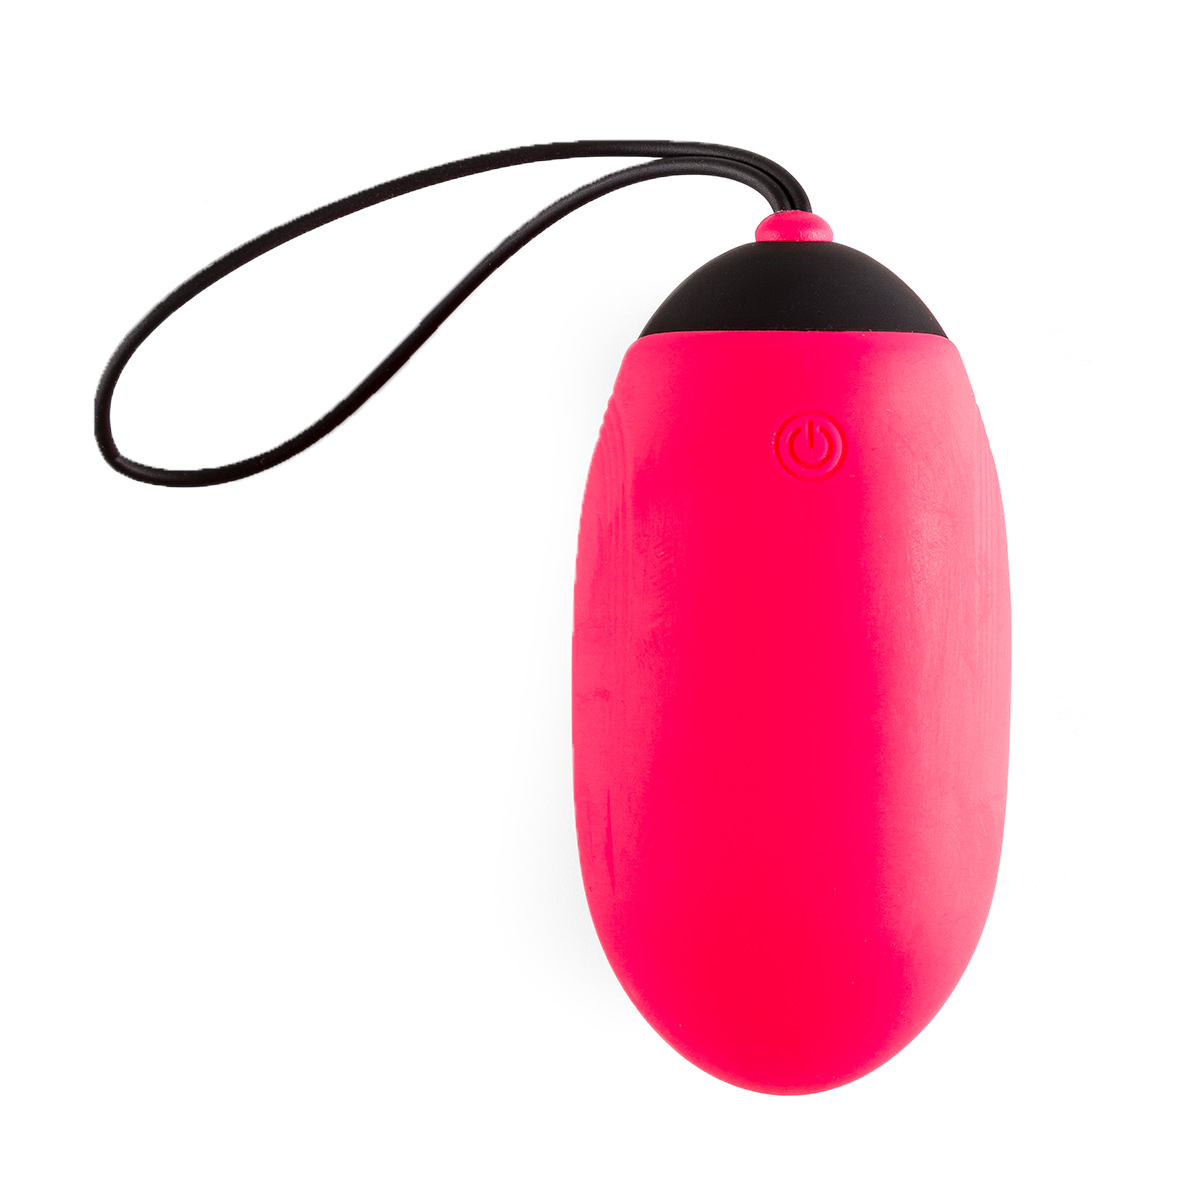 Rechargeable-Remote-Control-Egg-G6-Pink-OPR-3090080-1